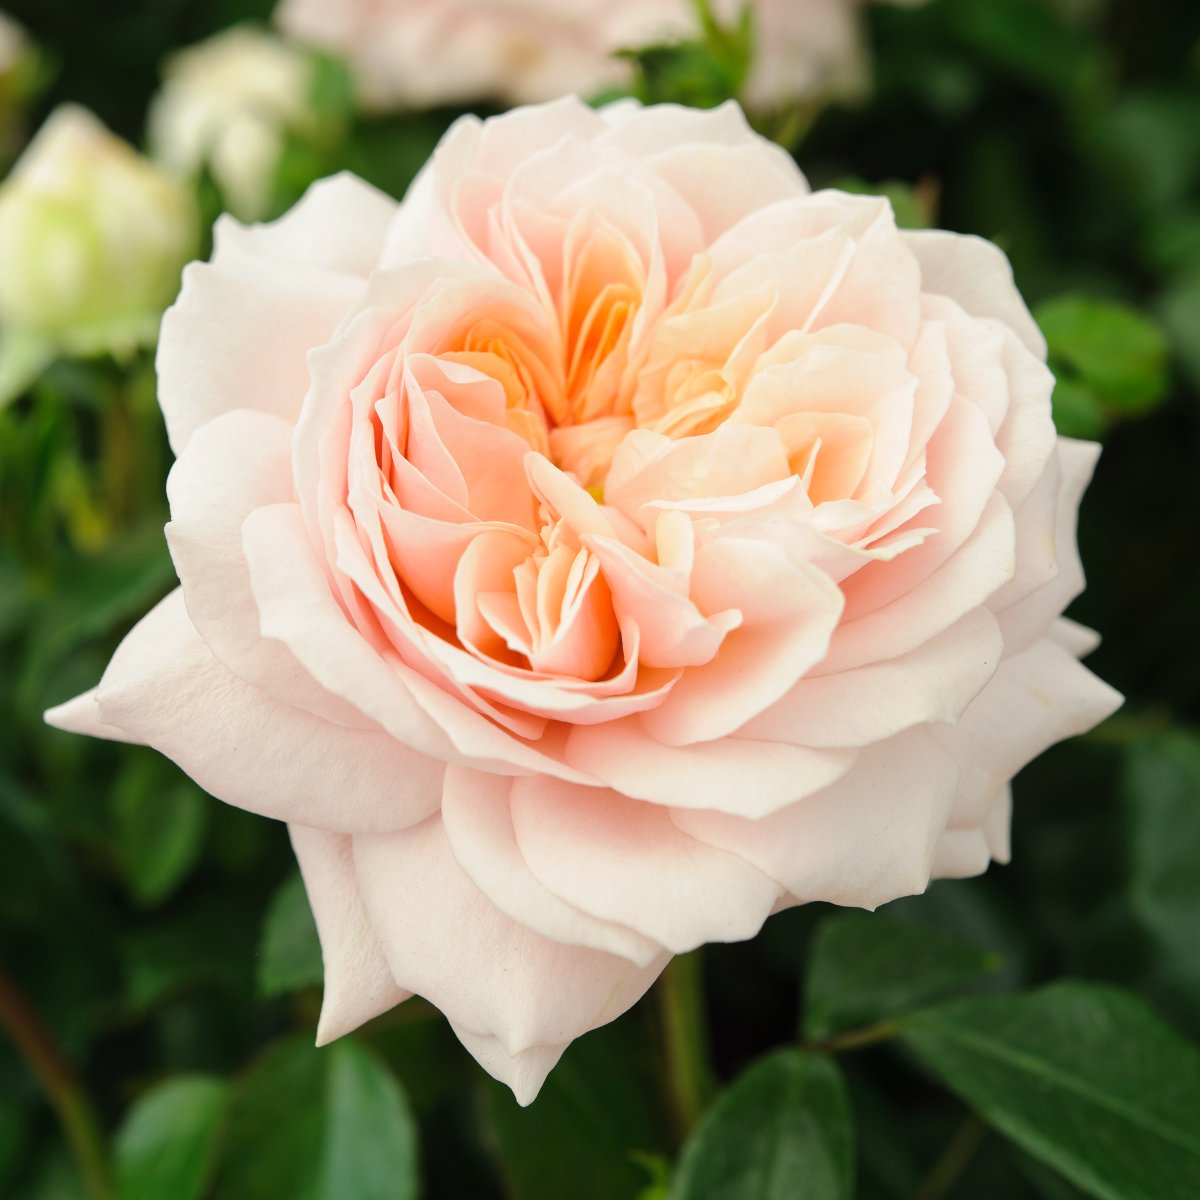 Want more flowers on your roses? 🌹 If you take care of them now, they will get safely through the winter, coming back healthy, vigorous and full of flowers the following year. 🌹 

Find out how to look after your roses in autumn here: spr.ly/6017PLcq1